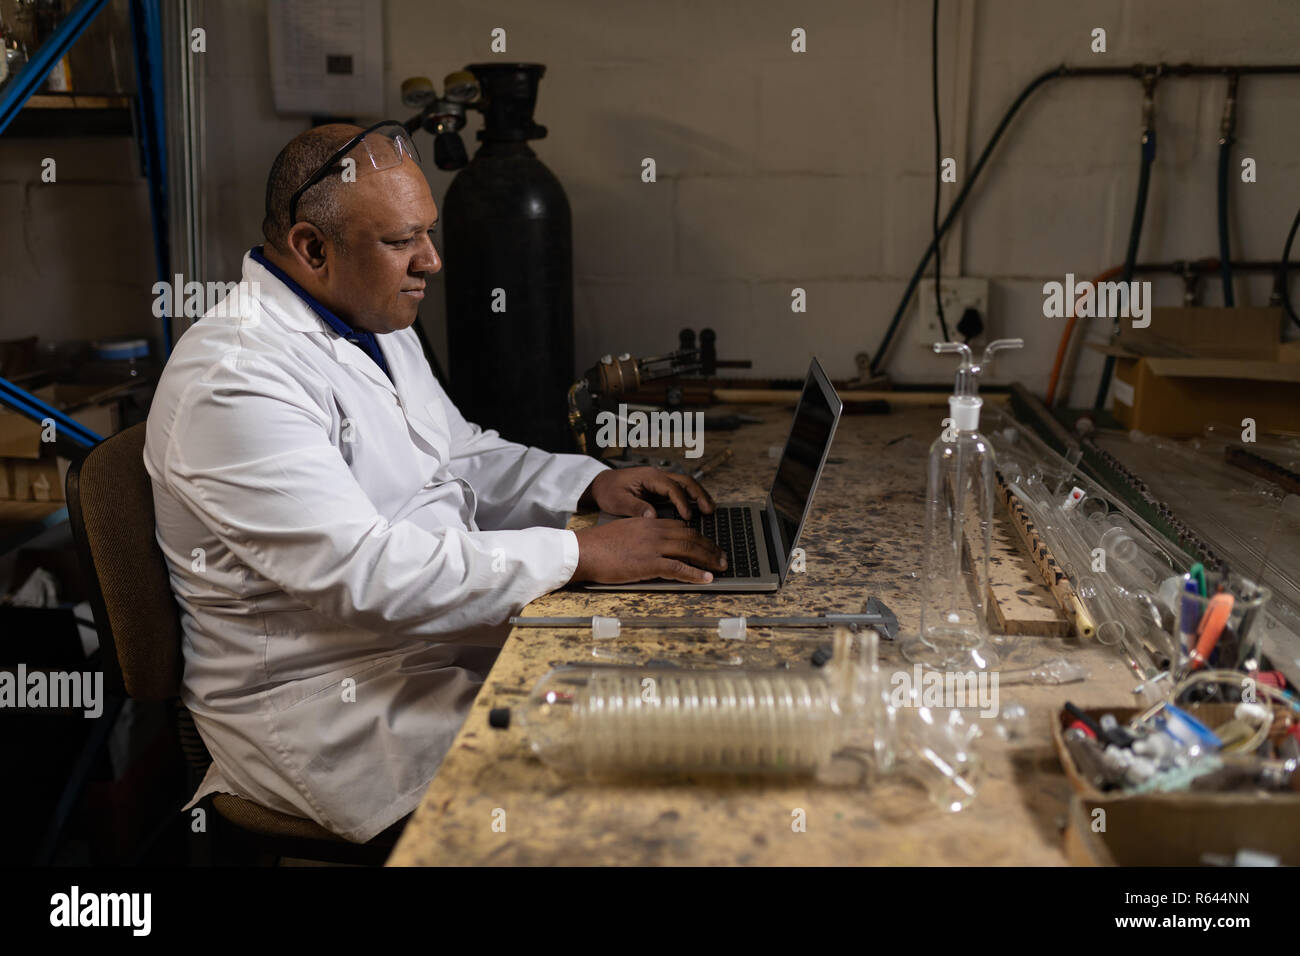 Worker using laptop in glass factory Banque D'Images